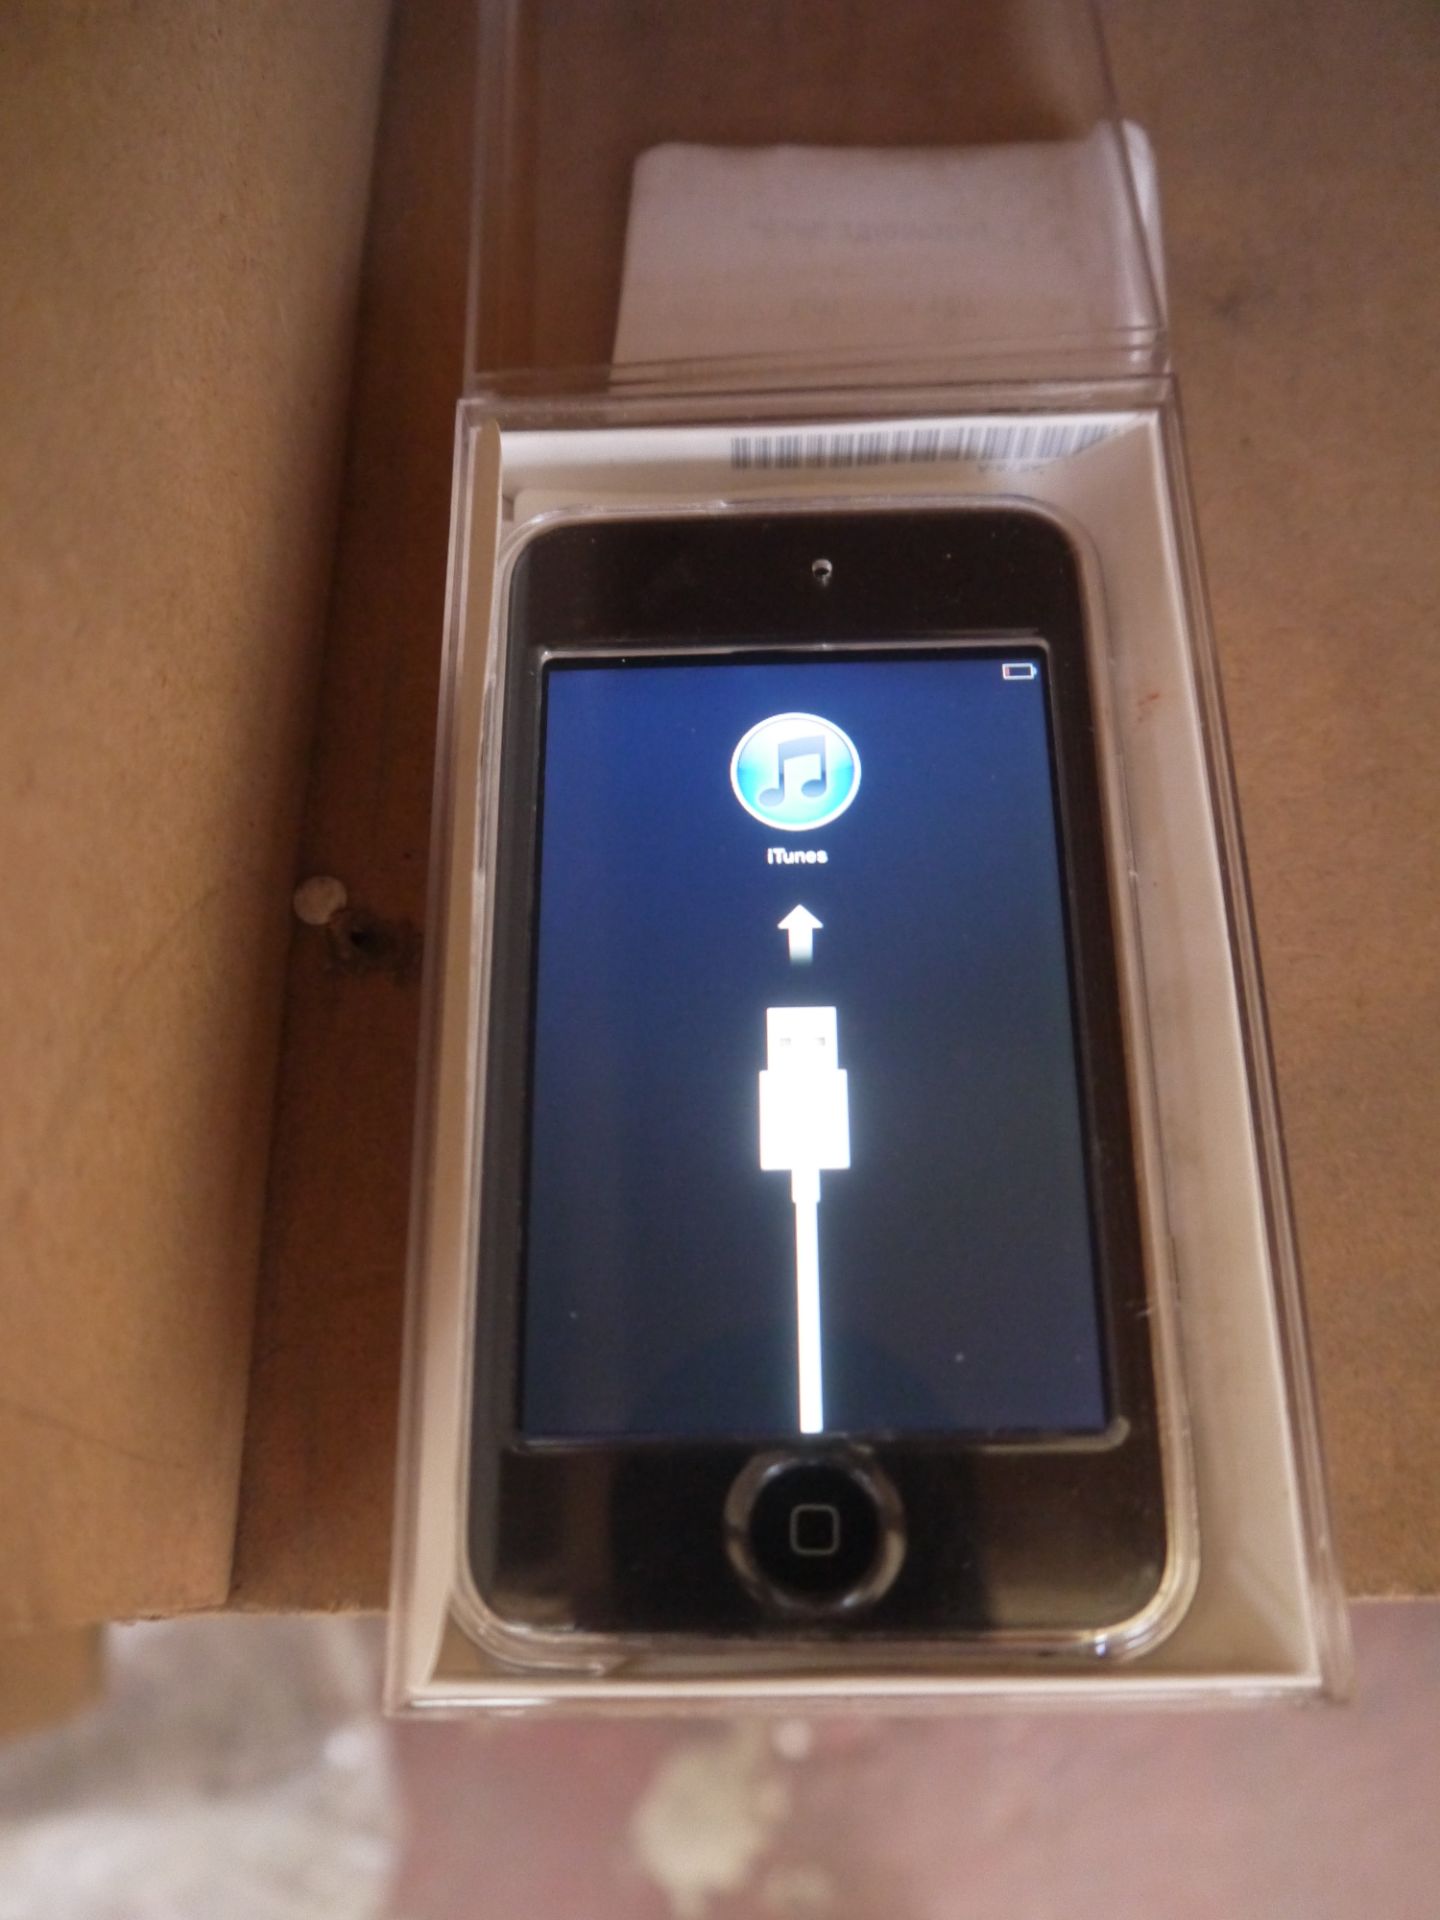 Apple iPod 8GB, with protective screen cover and case, working and in original case but no